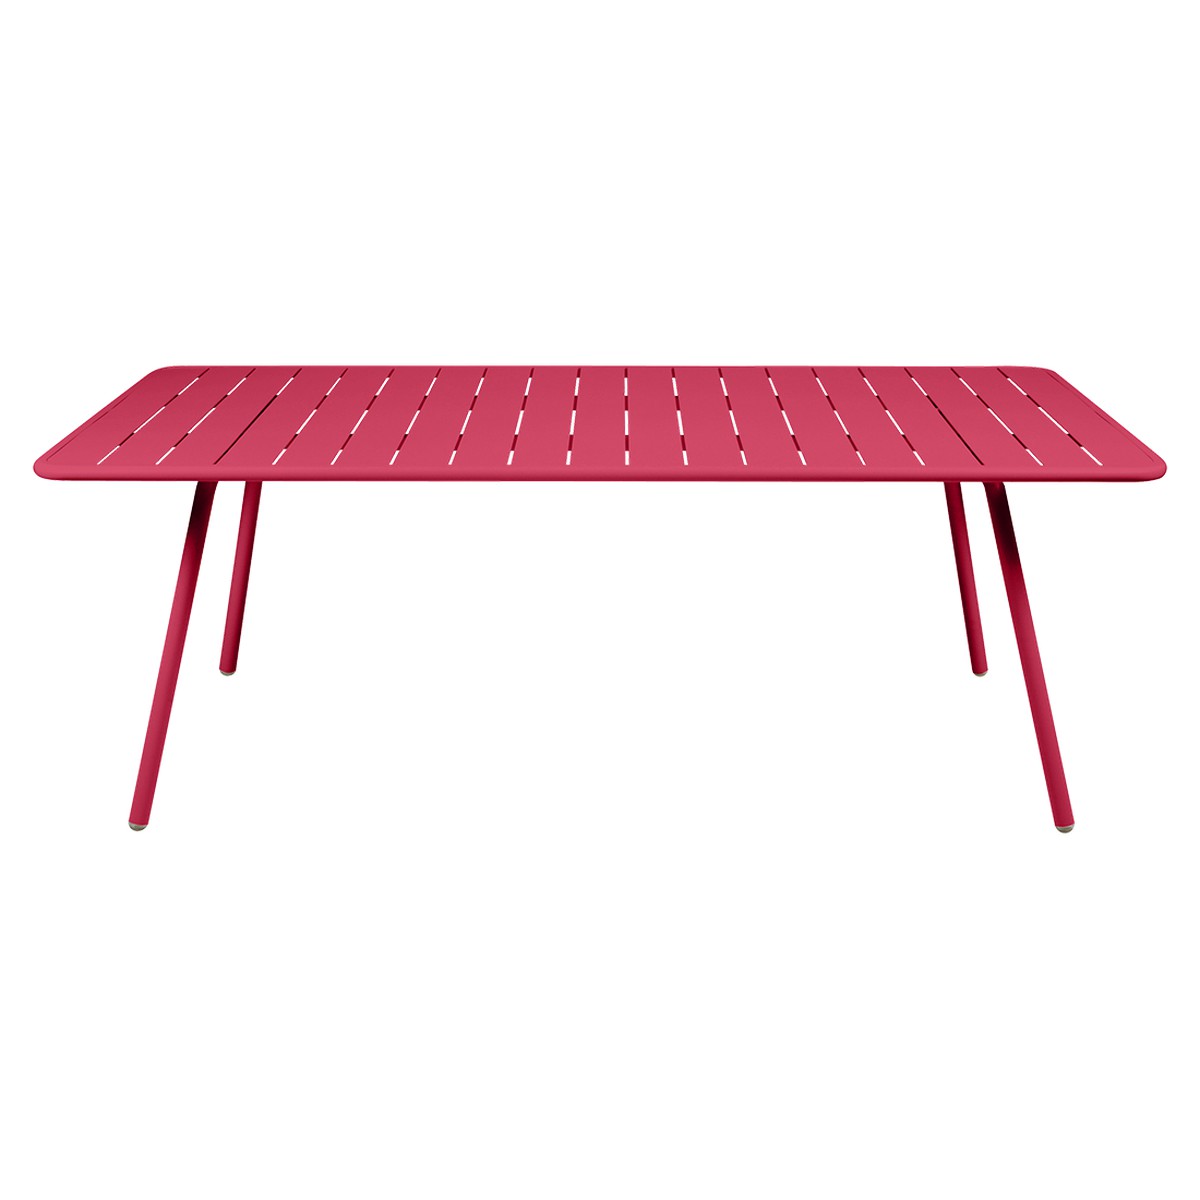 Fermob Luxembourg Table Luxembourg rectangulaire Rouge rose bonbon L 207 x l 100 x H74cm